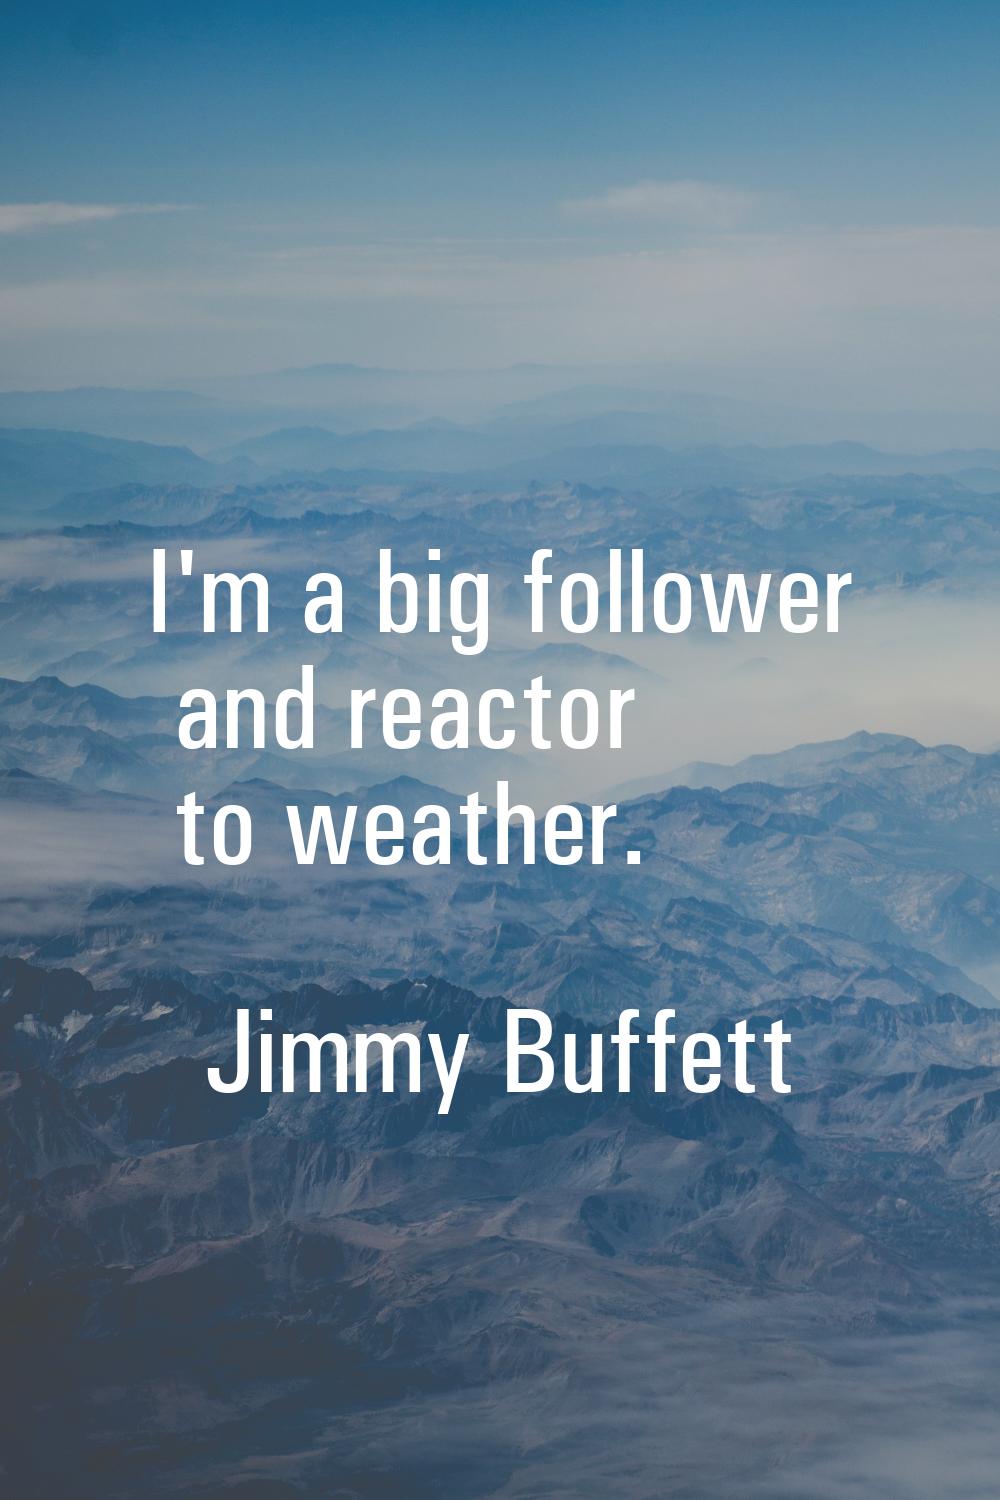 I'm a big follower and reactor to weather.